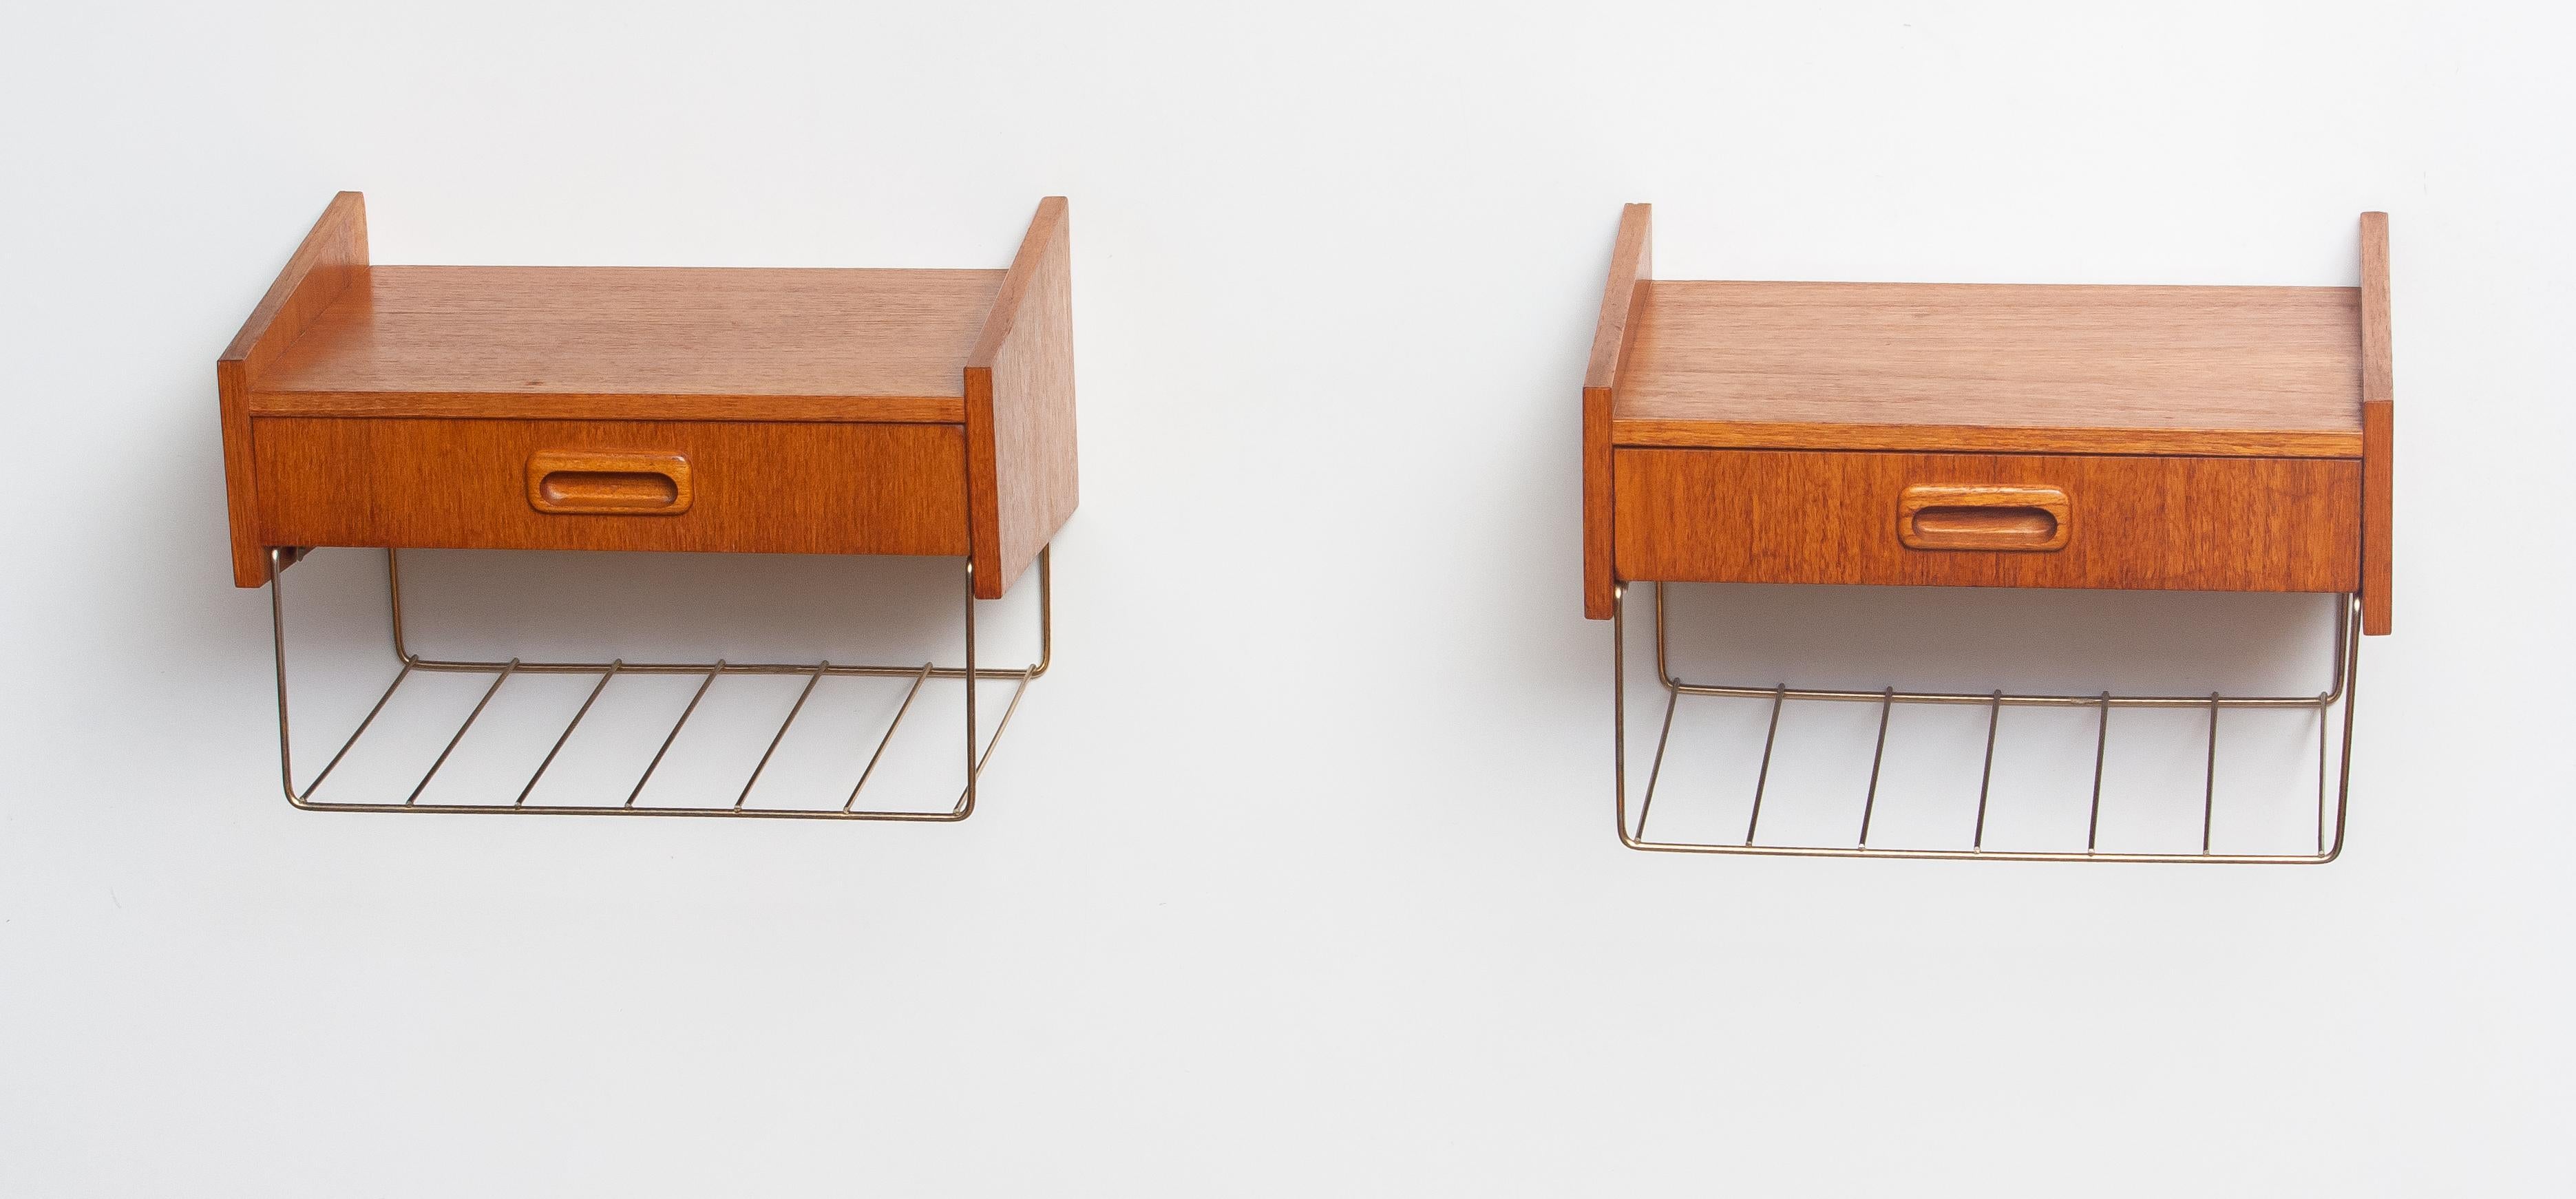 1950's Scandinavian Wall Mounted Bedside Tables / Night Stands in Teak and Brass In Good Condition In Silvolde, Gelderland